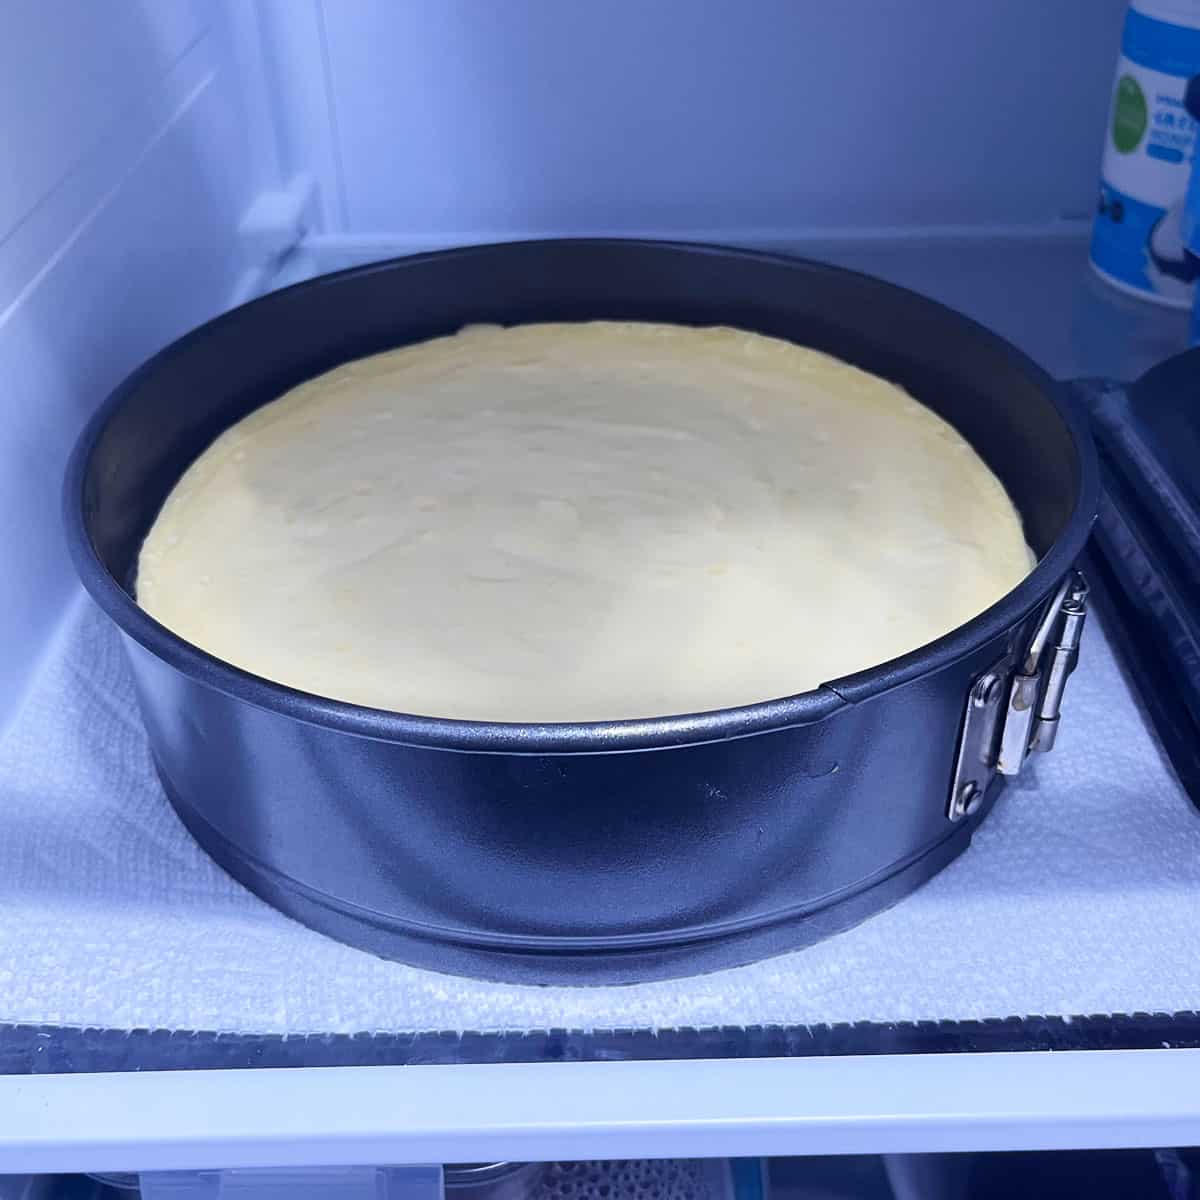 Refrigerating the cheesecake until set.